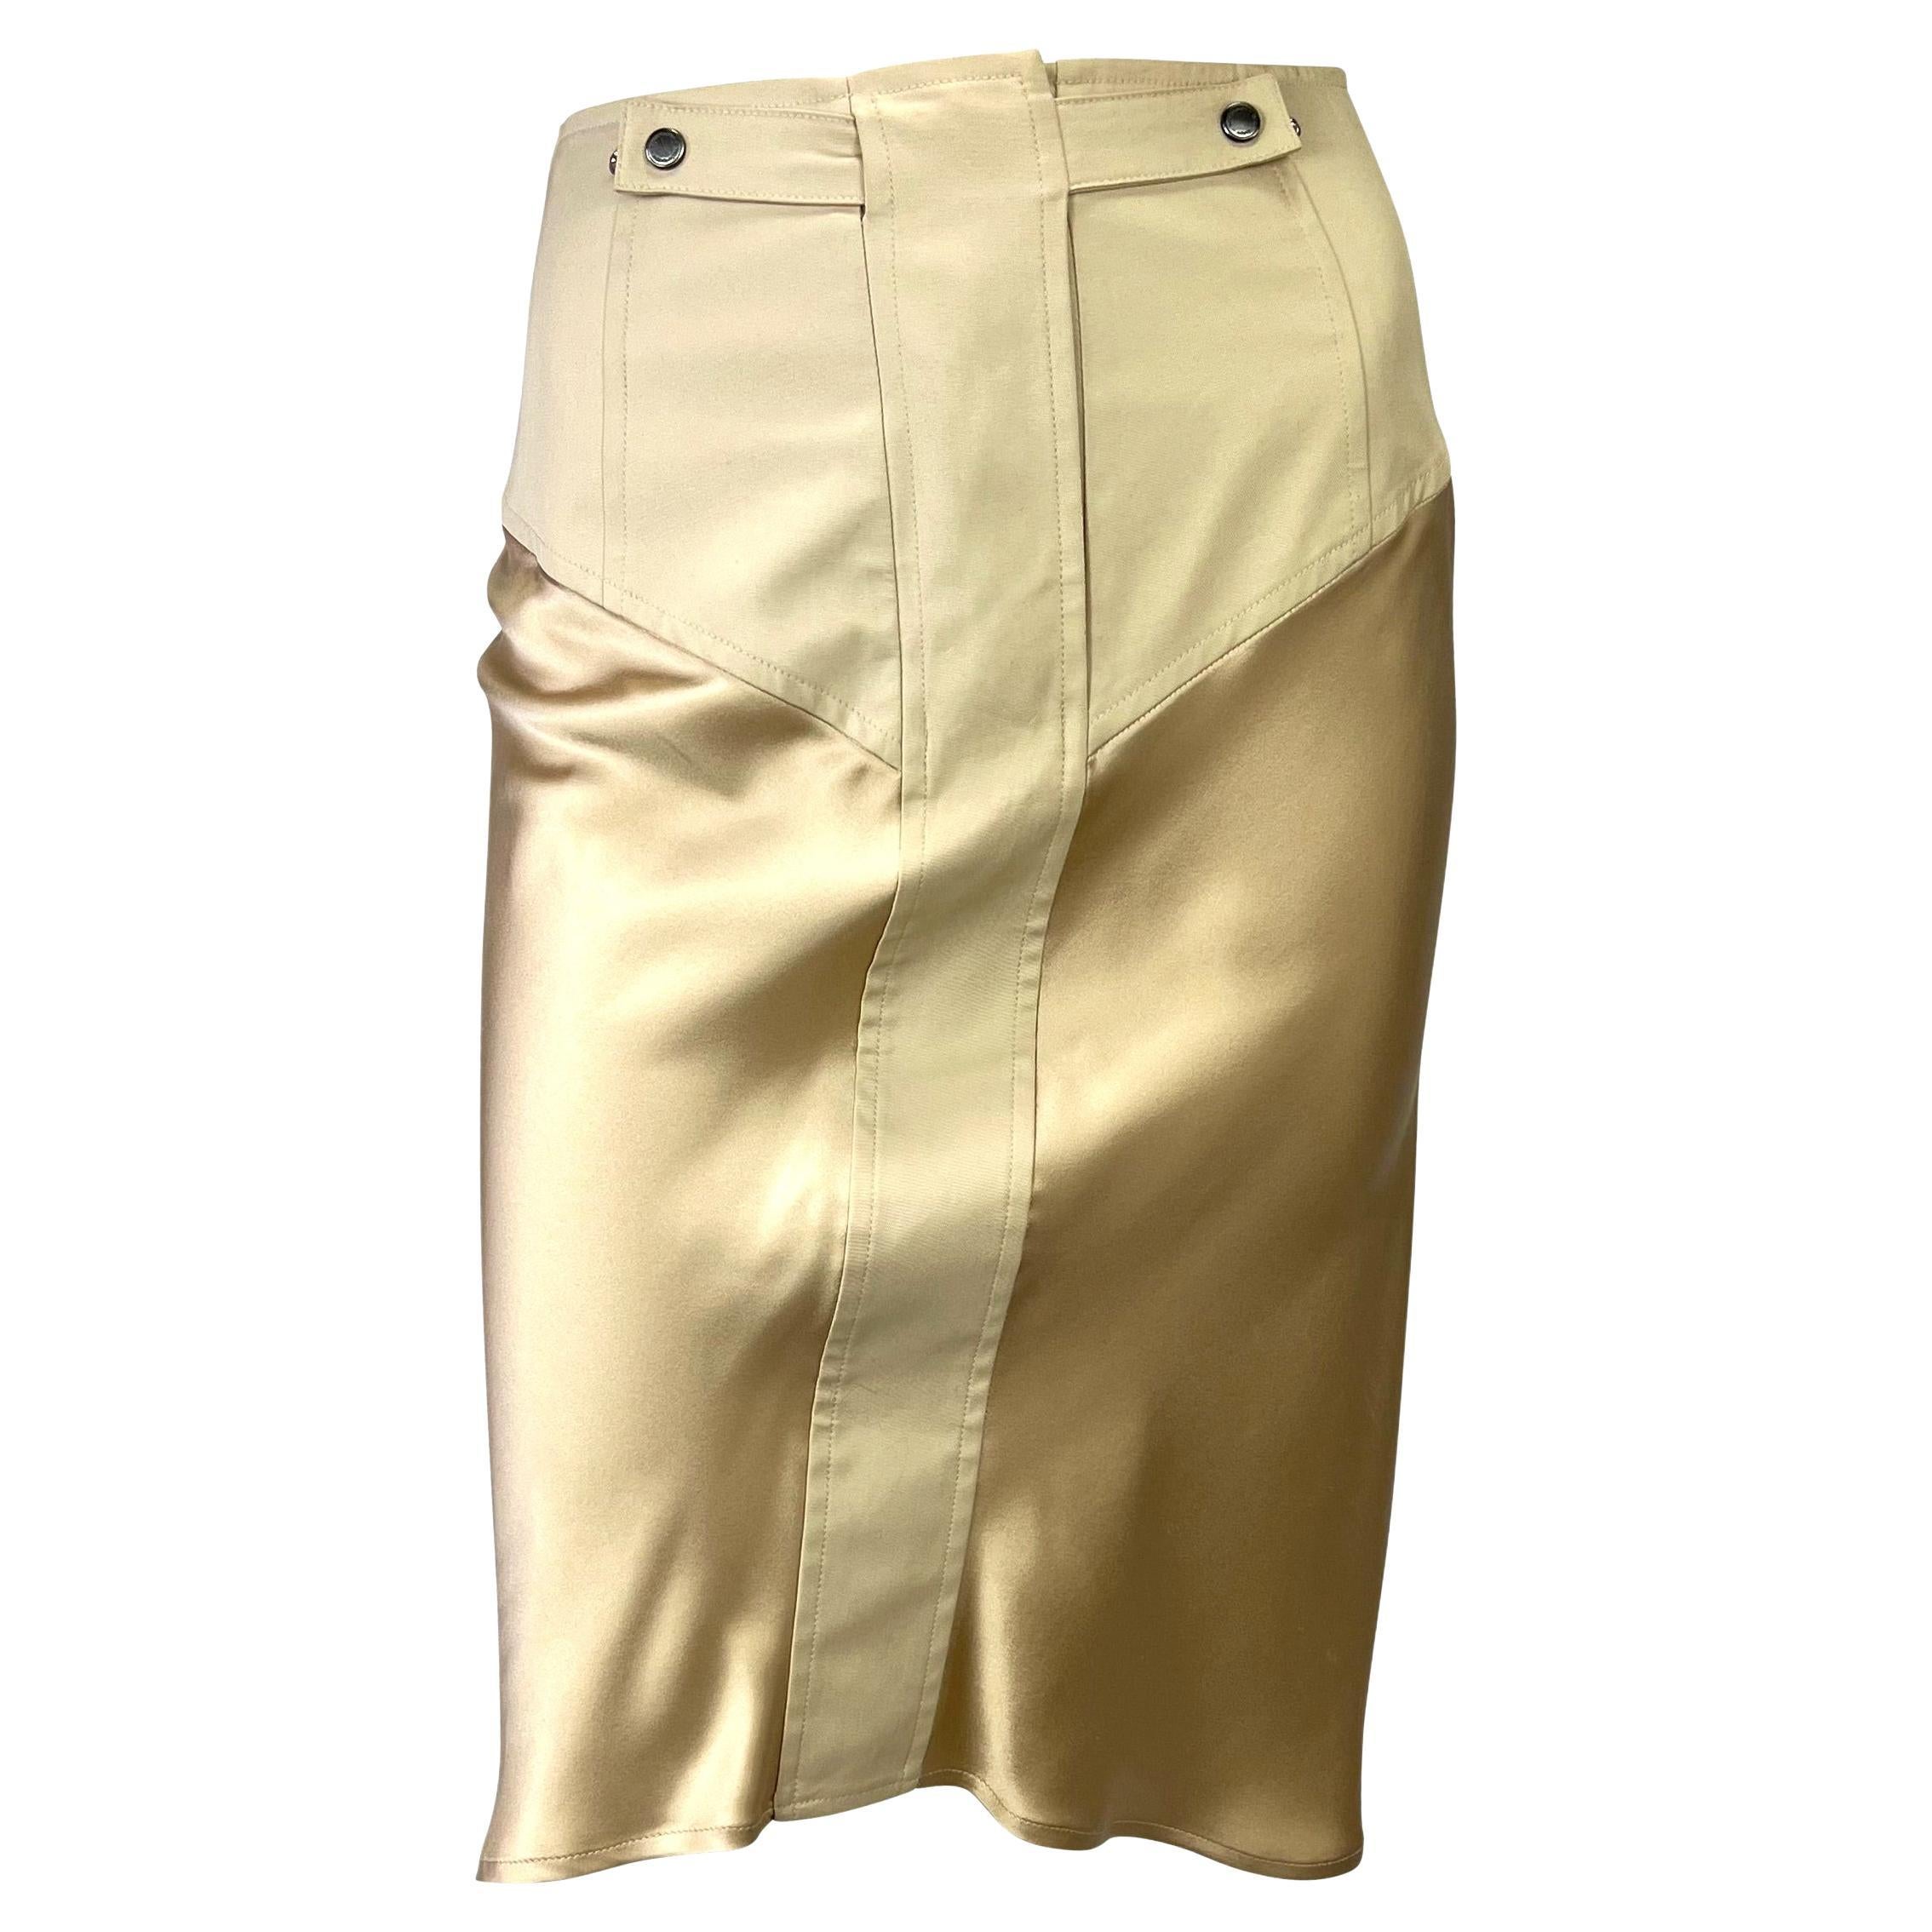 Presenting a champagne-colored silk satin Yves Saint Laurent Rive Gauche skirt set, designed by Tom Ford. From 2003, this beautiful set is made up of a silk satin and canvas jacket and matching skirt. The jacket features a stand-up collar, two